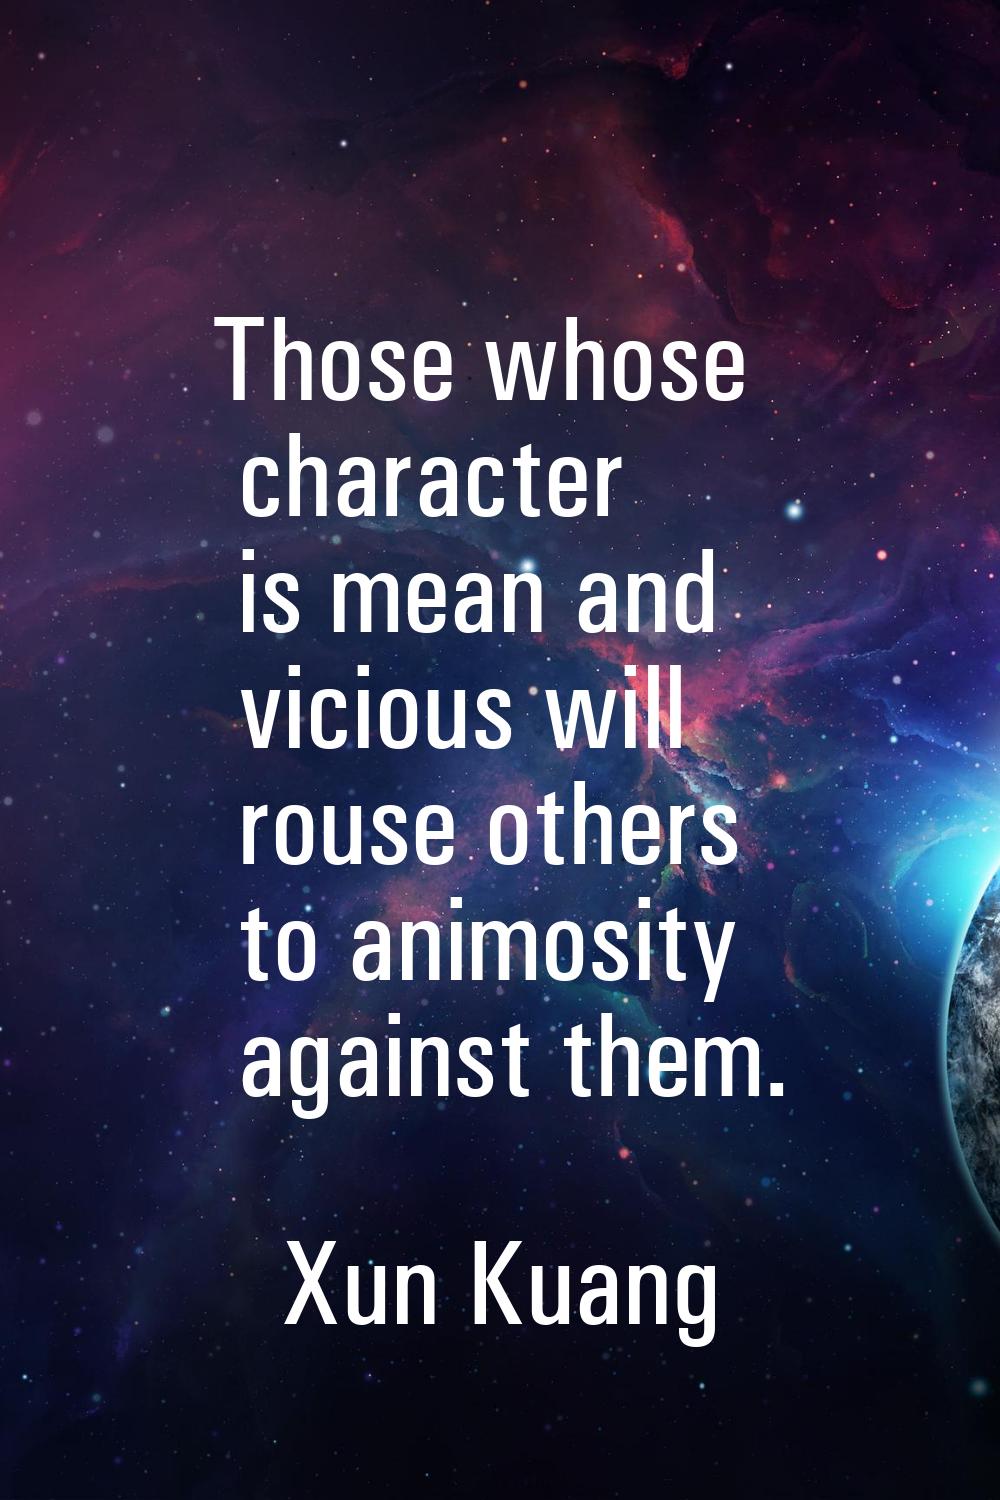 Those whose character is mean and vicious will rouse others to animosity against them.